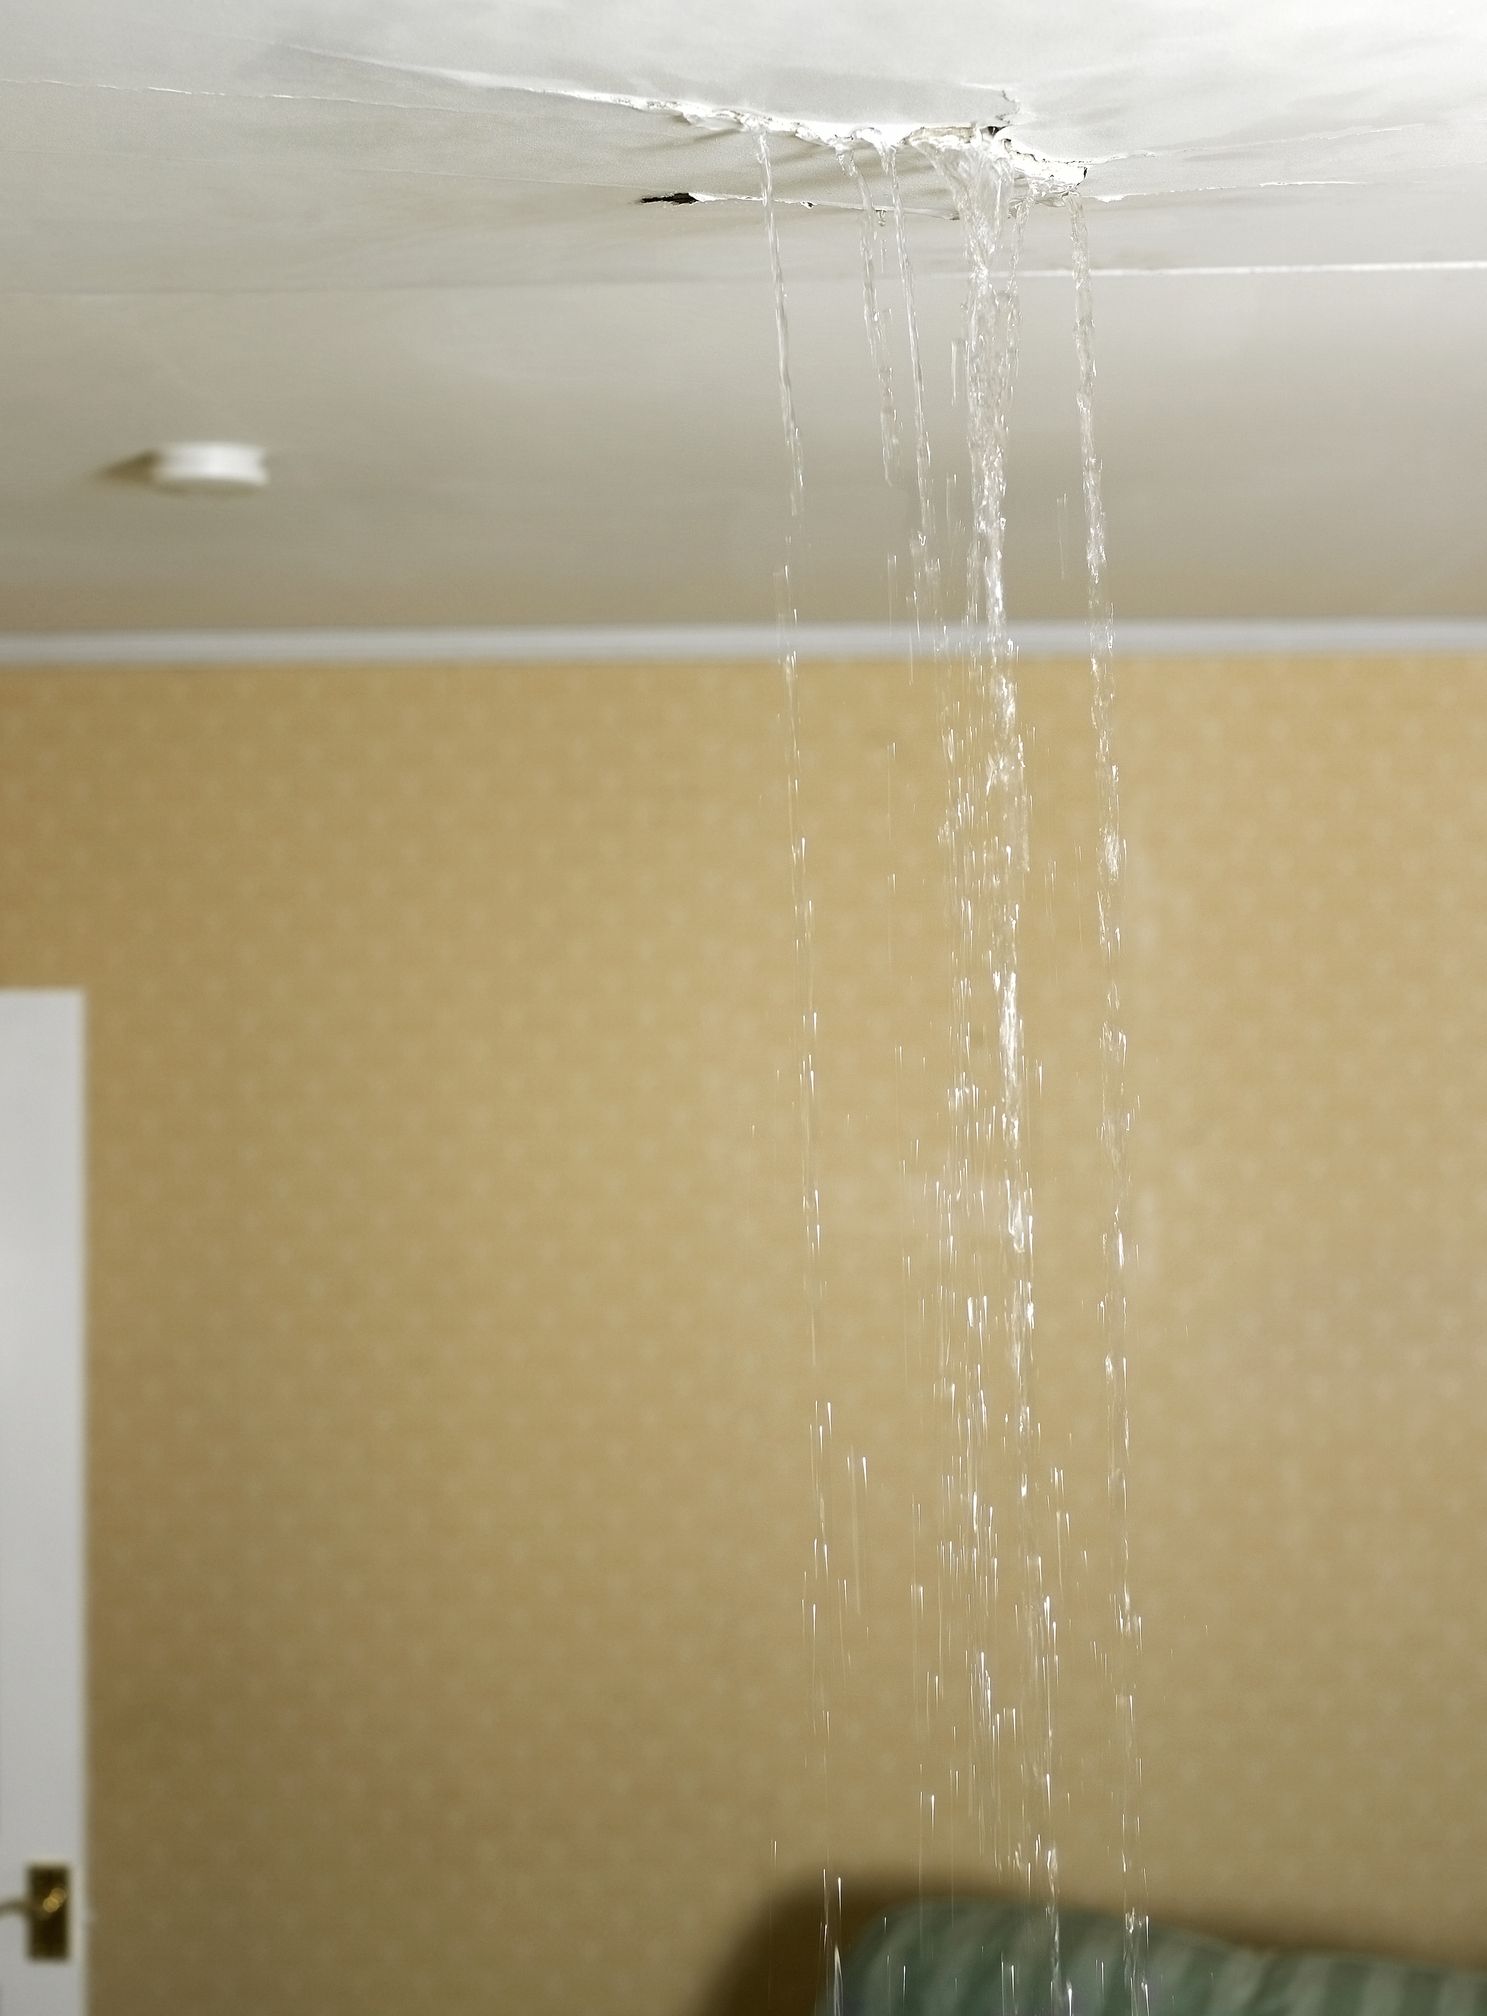 8 Things Your Roof Is Trying To Tell You - Yellow Drips On Bathroom Walls